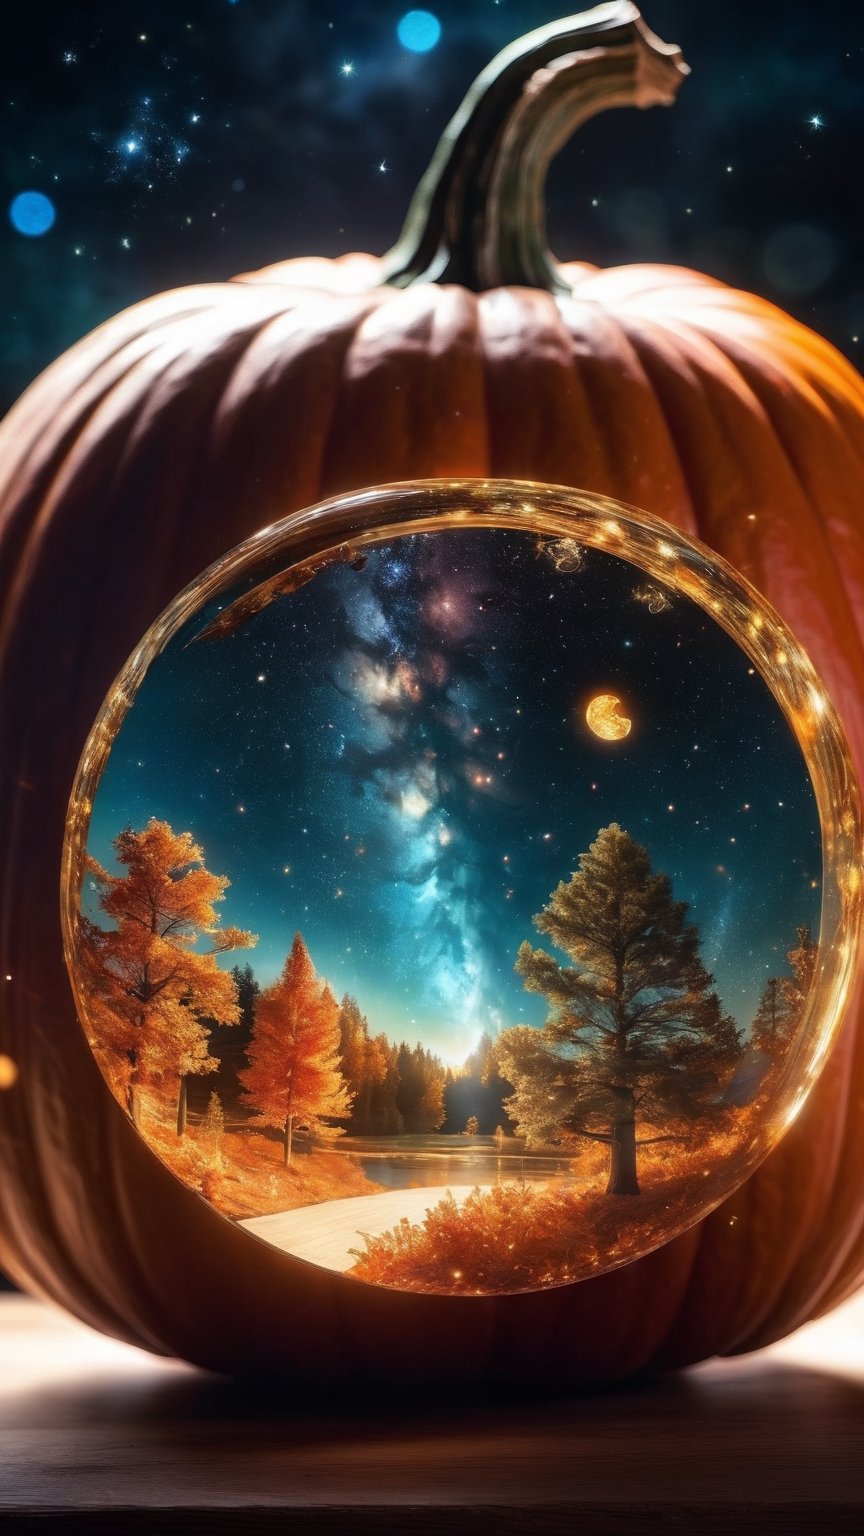 lovely double exposure image by blending together the Galaxy and a glass pumpkin. The Galaxy and stars should serve as the underlying backdrop, with its details subtly incorporated into the glossy glass pumpkin, sharp focus, double exposure, glossy glass pumpkin, (translucent glass figure of an pumpkin) (Galaxy inside) lifeless, dead, glass apple, earthy colors, decadence, intricate design, hyper realistic, high definition, extremely detailed, dark softbox image, raytracing, cinematic, HDR, photorealistic (double exposure:1.1)